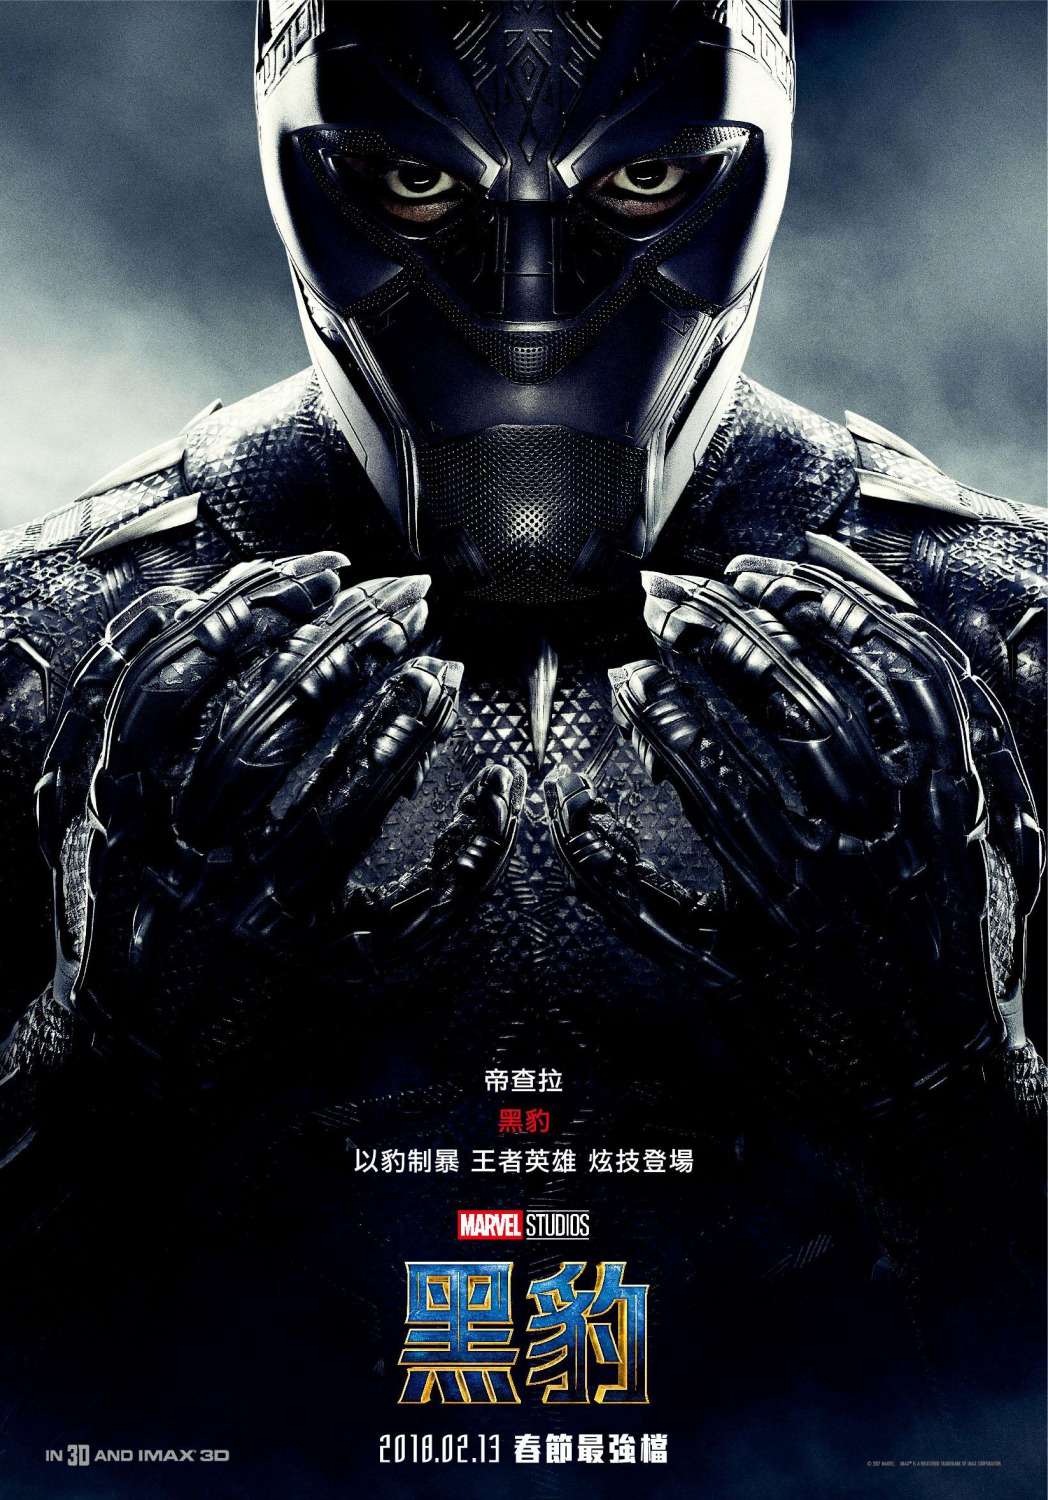 Extra Large Movie Poster Image for Black Panther (#15 of 29)